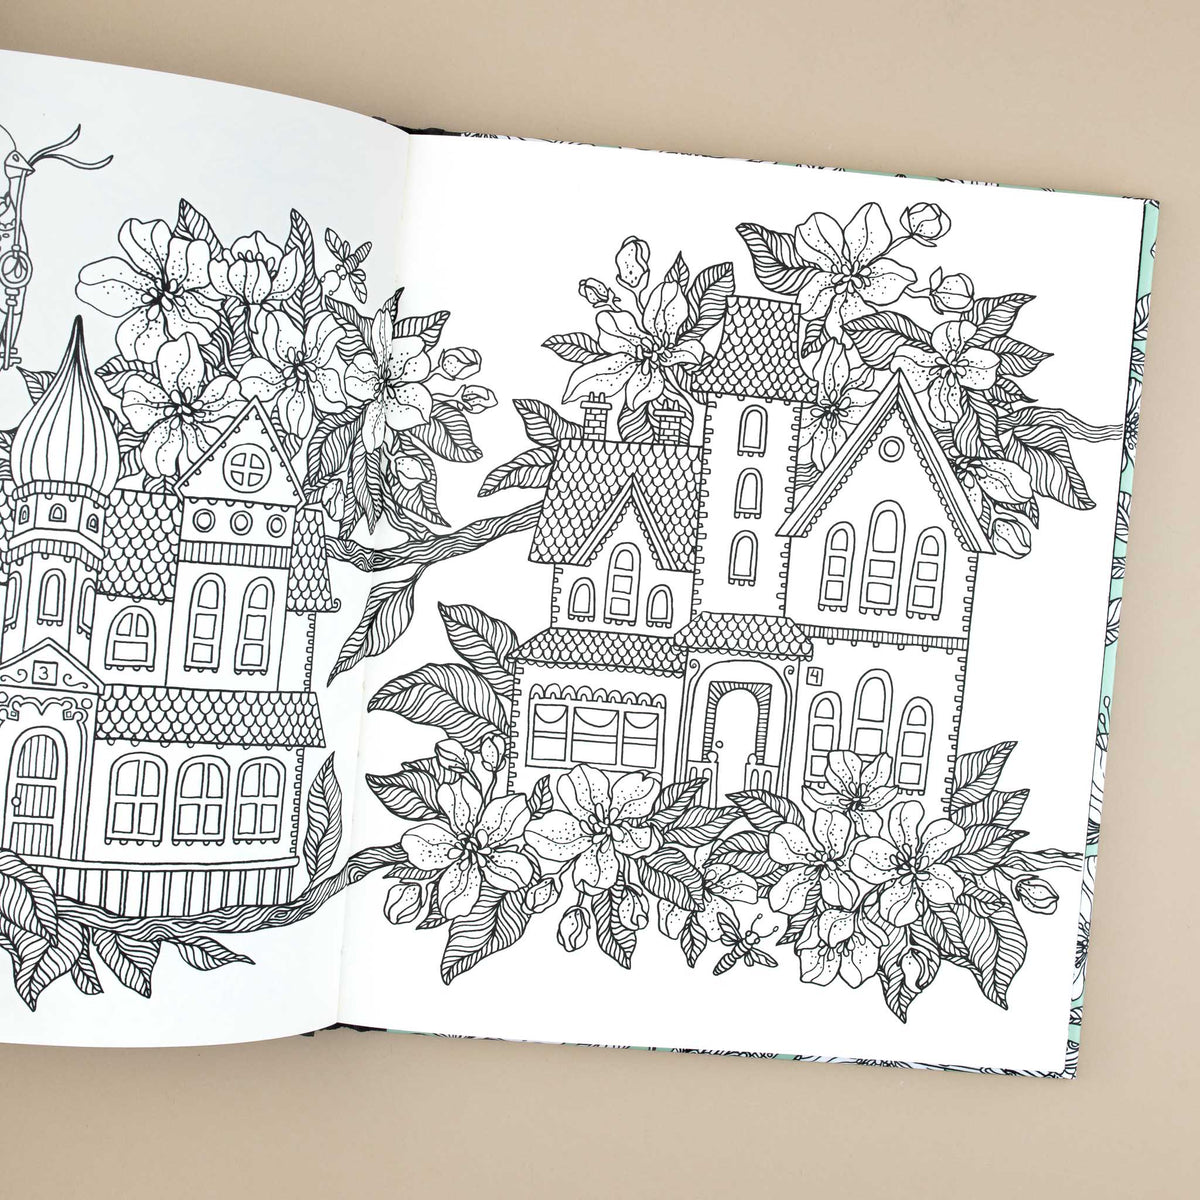 Daydreams Coloring Book By Hanna Karlzon #hannakarlzon  Coloring books,  Color pencil art, Coloring book pages